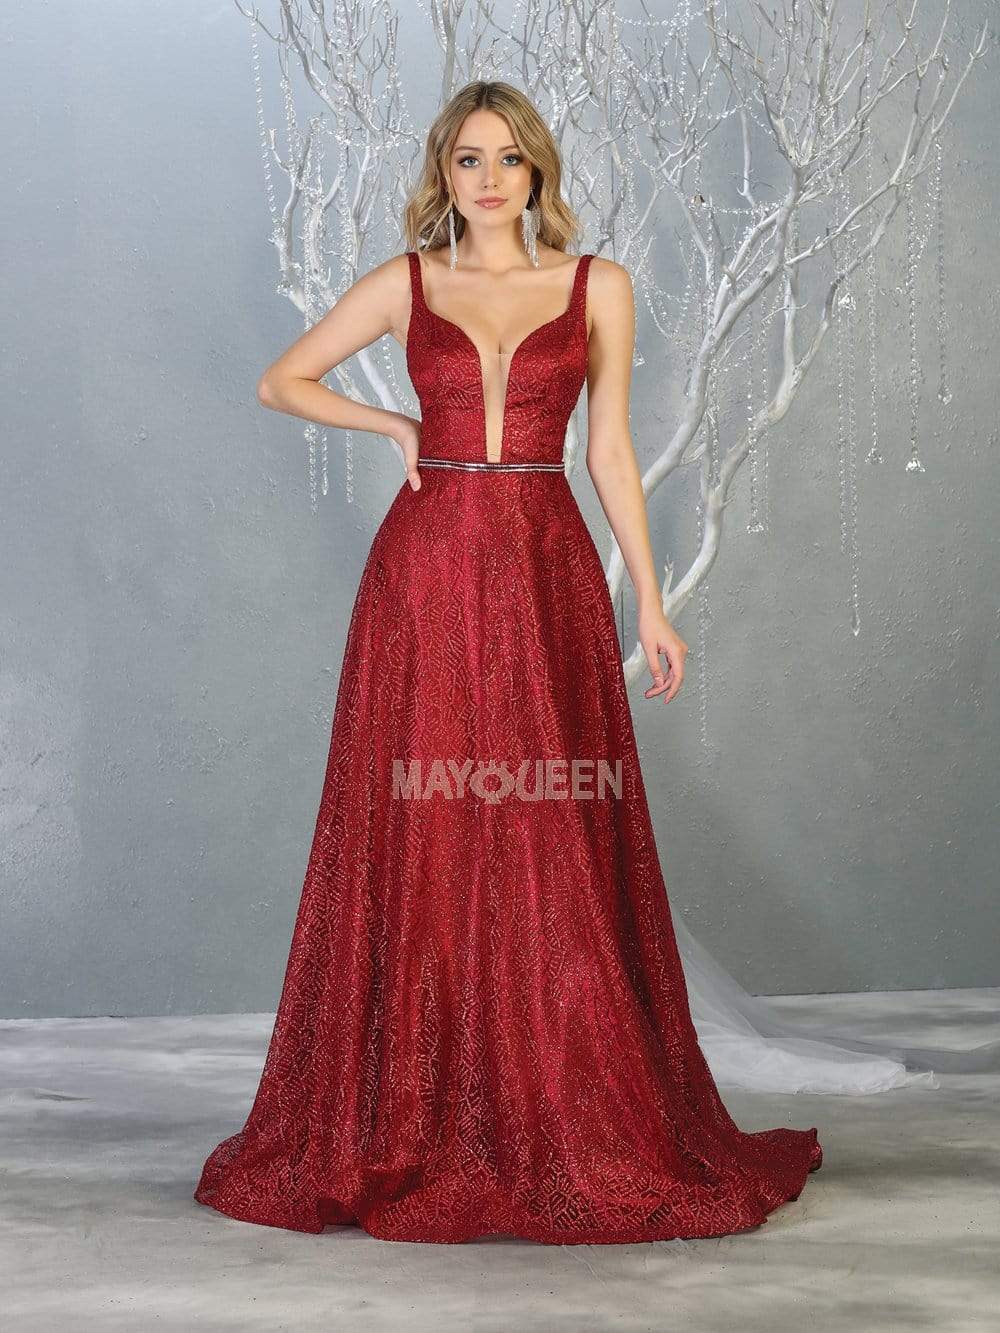 May Queen - MQ1771 Glitter Embellished Plunging Sweetheart Dress Prom Dresses 4 / Burgundy